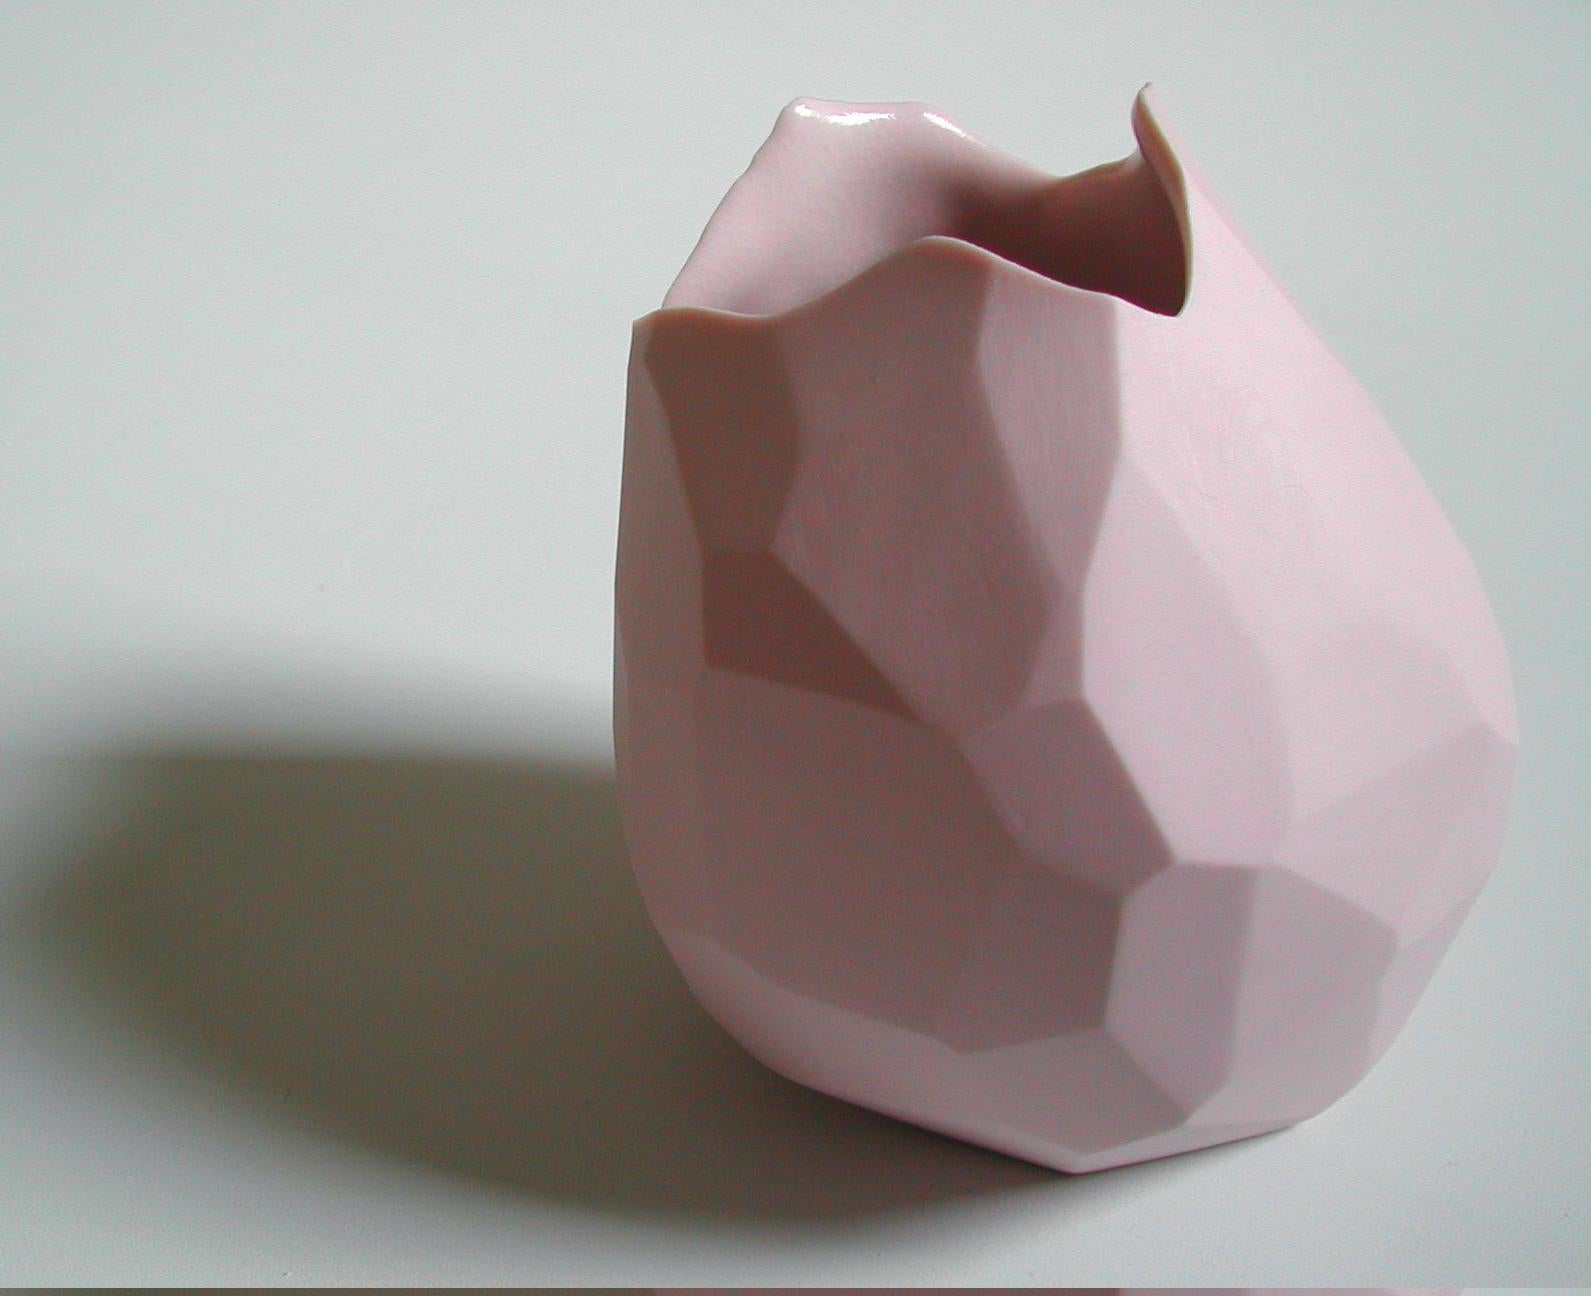 Unique facet vase in pink porcelain. Designed and made by David Wiseman, USA, 2010.
         